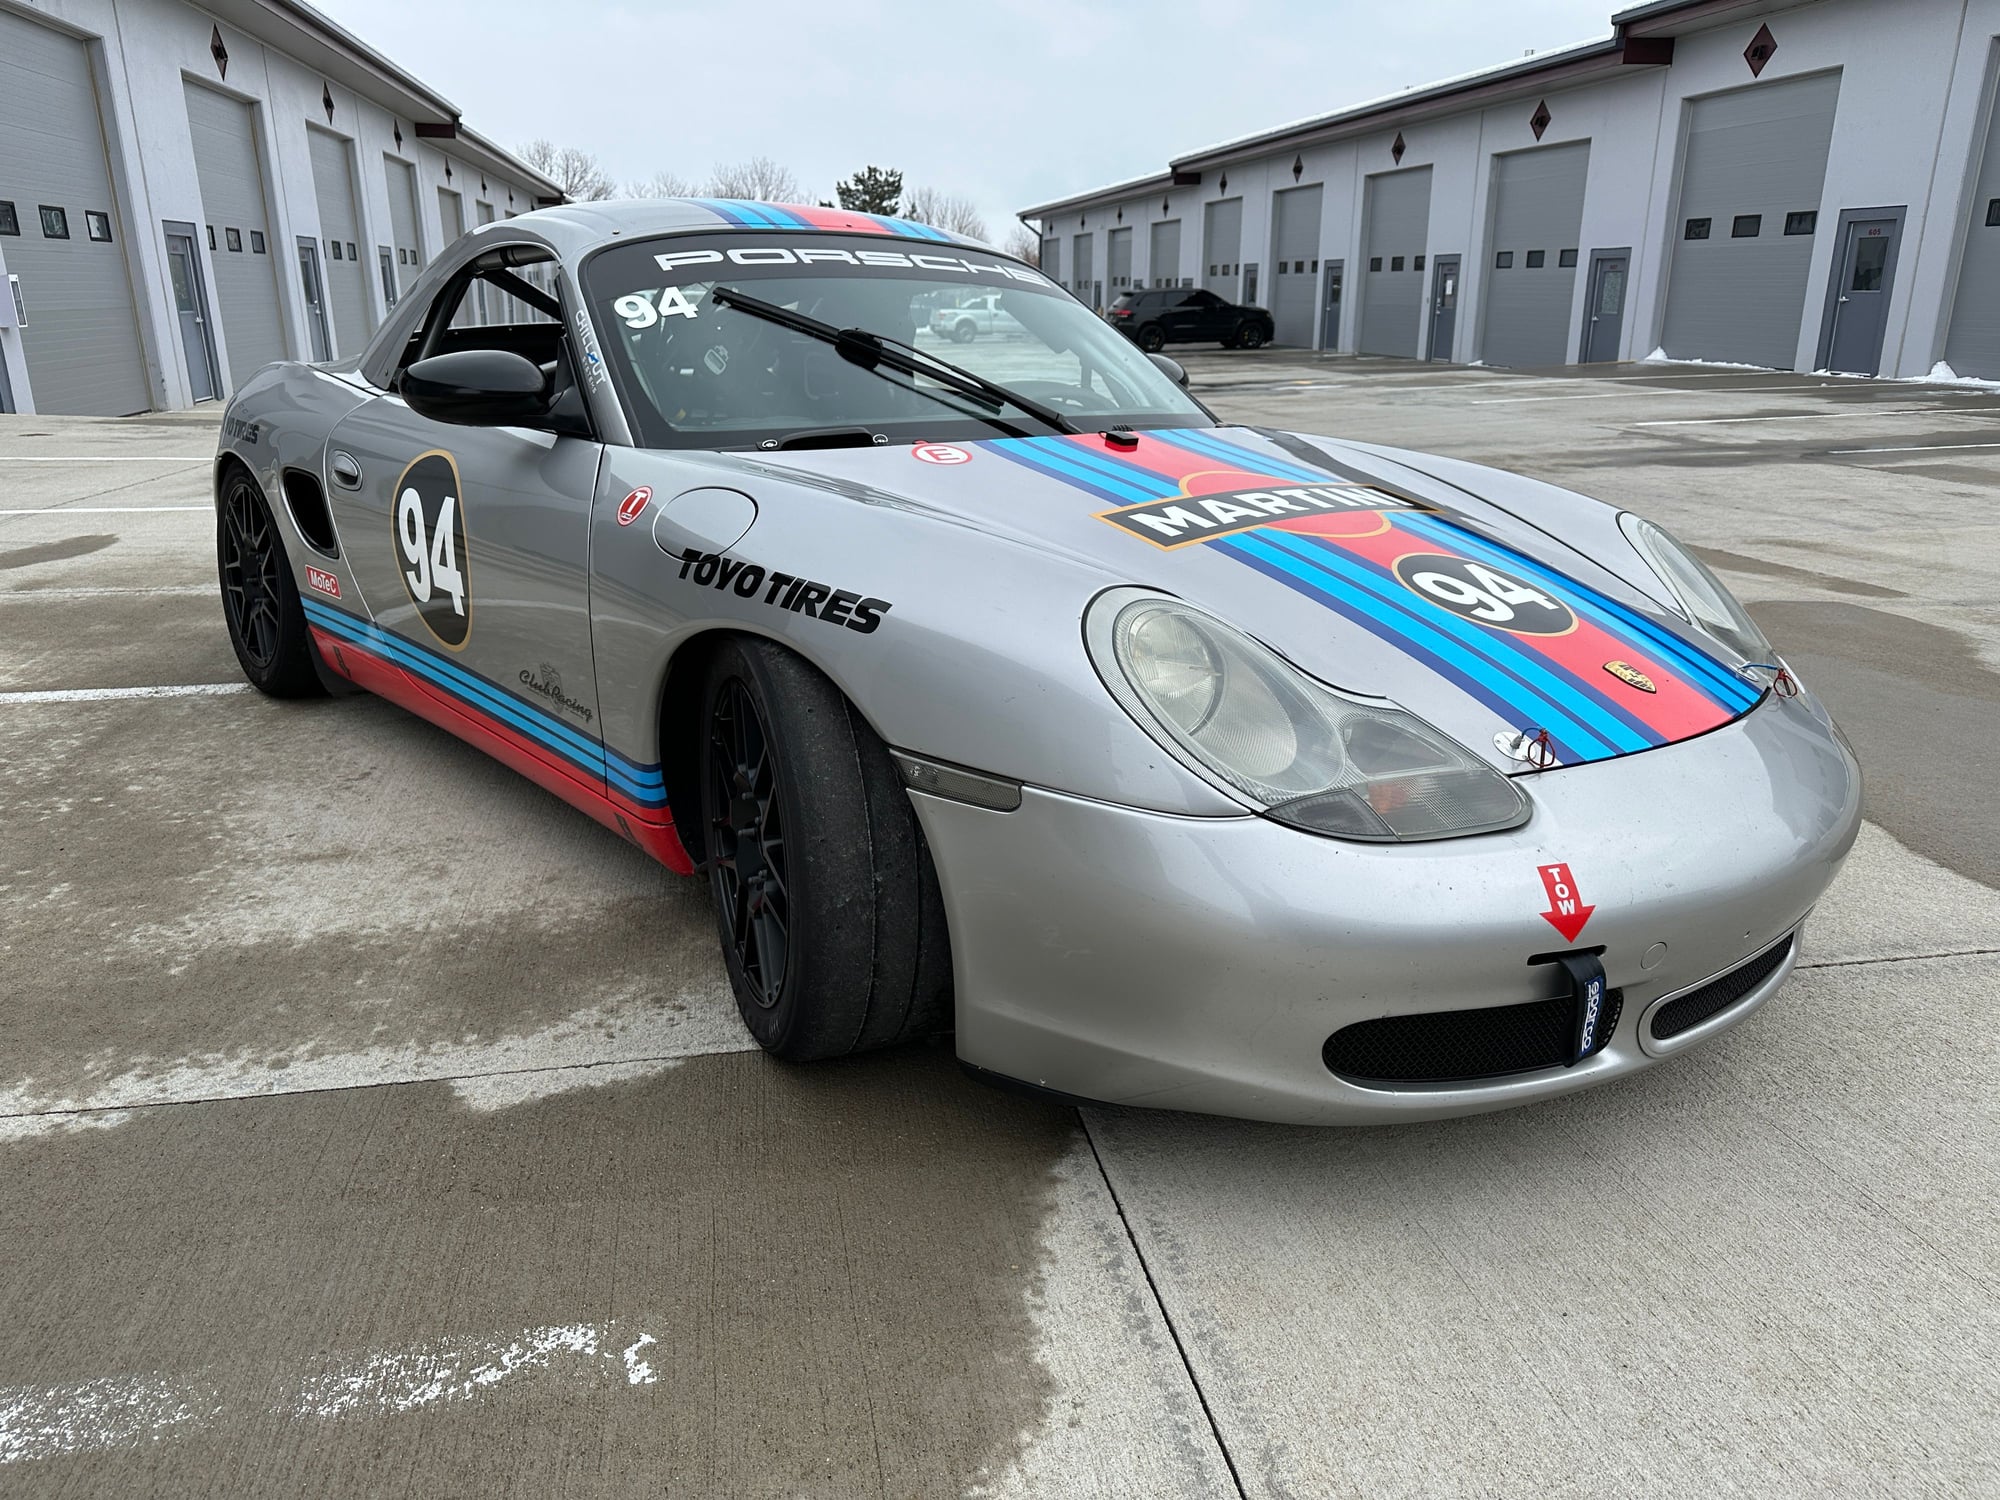 1997 Porsche Boxster - FS: Spec Boxster Race Car - 1997 Chassis - High End Build - Fast Car - Ready to Race! - Used - VIN WP0CA2983VS623106 - 6 cyl - 2WD - Manual - Convertible - Silver - Fort Collins, CO 80525, United States